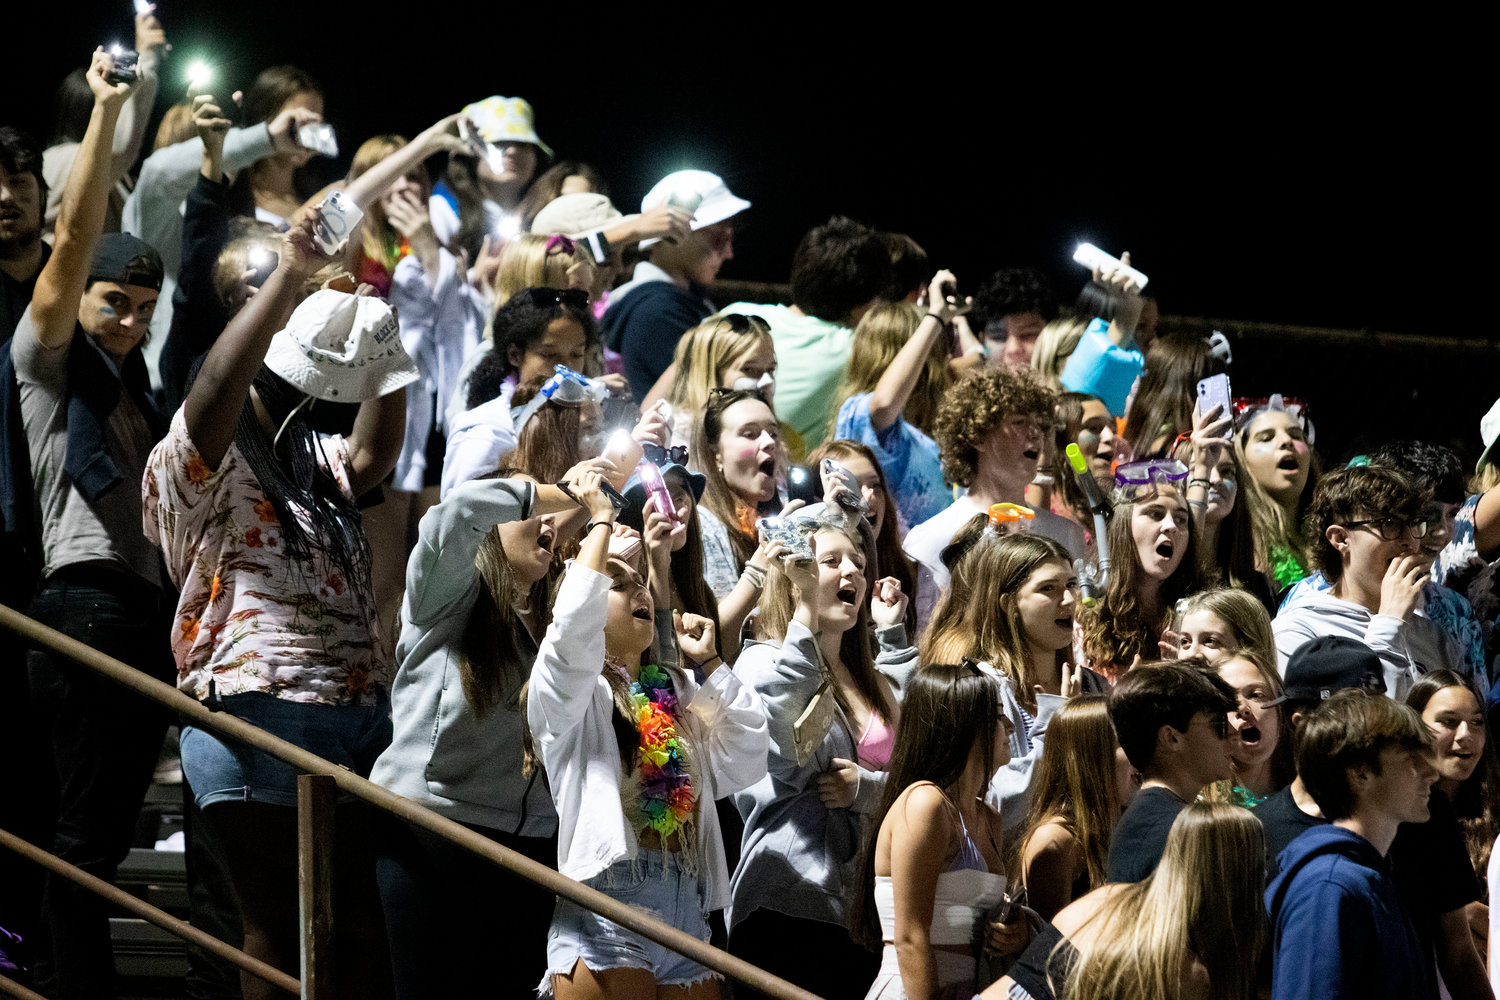 The Dog Pound wave their lit phone lights as they sing during the game.